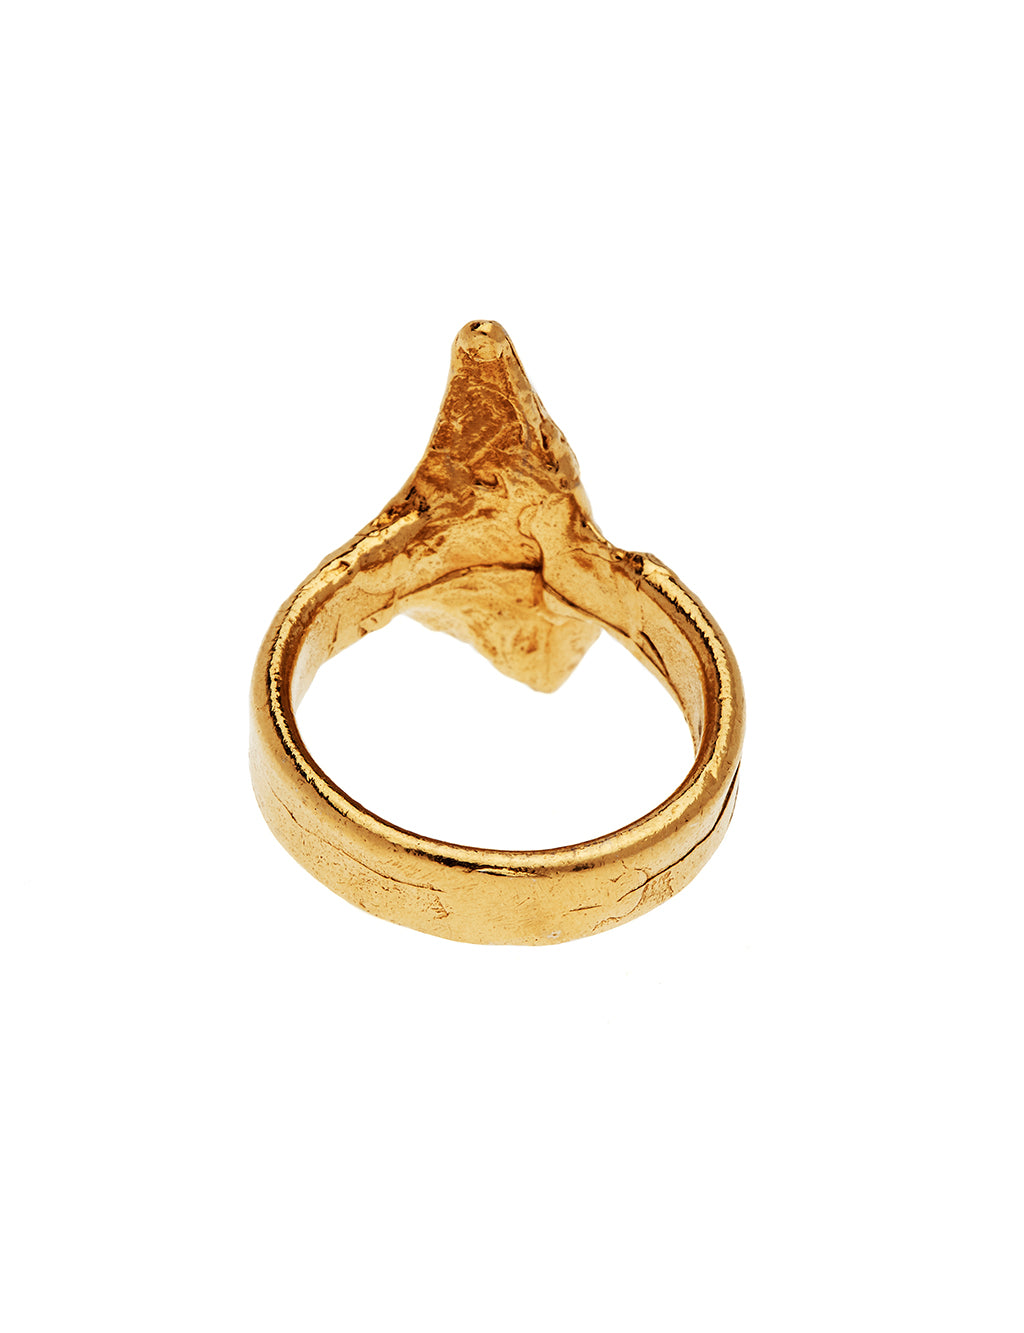 Gold vermeil textured ring, showing band